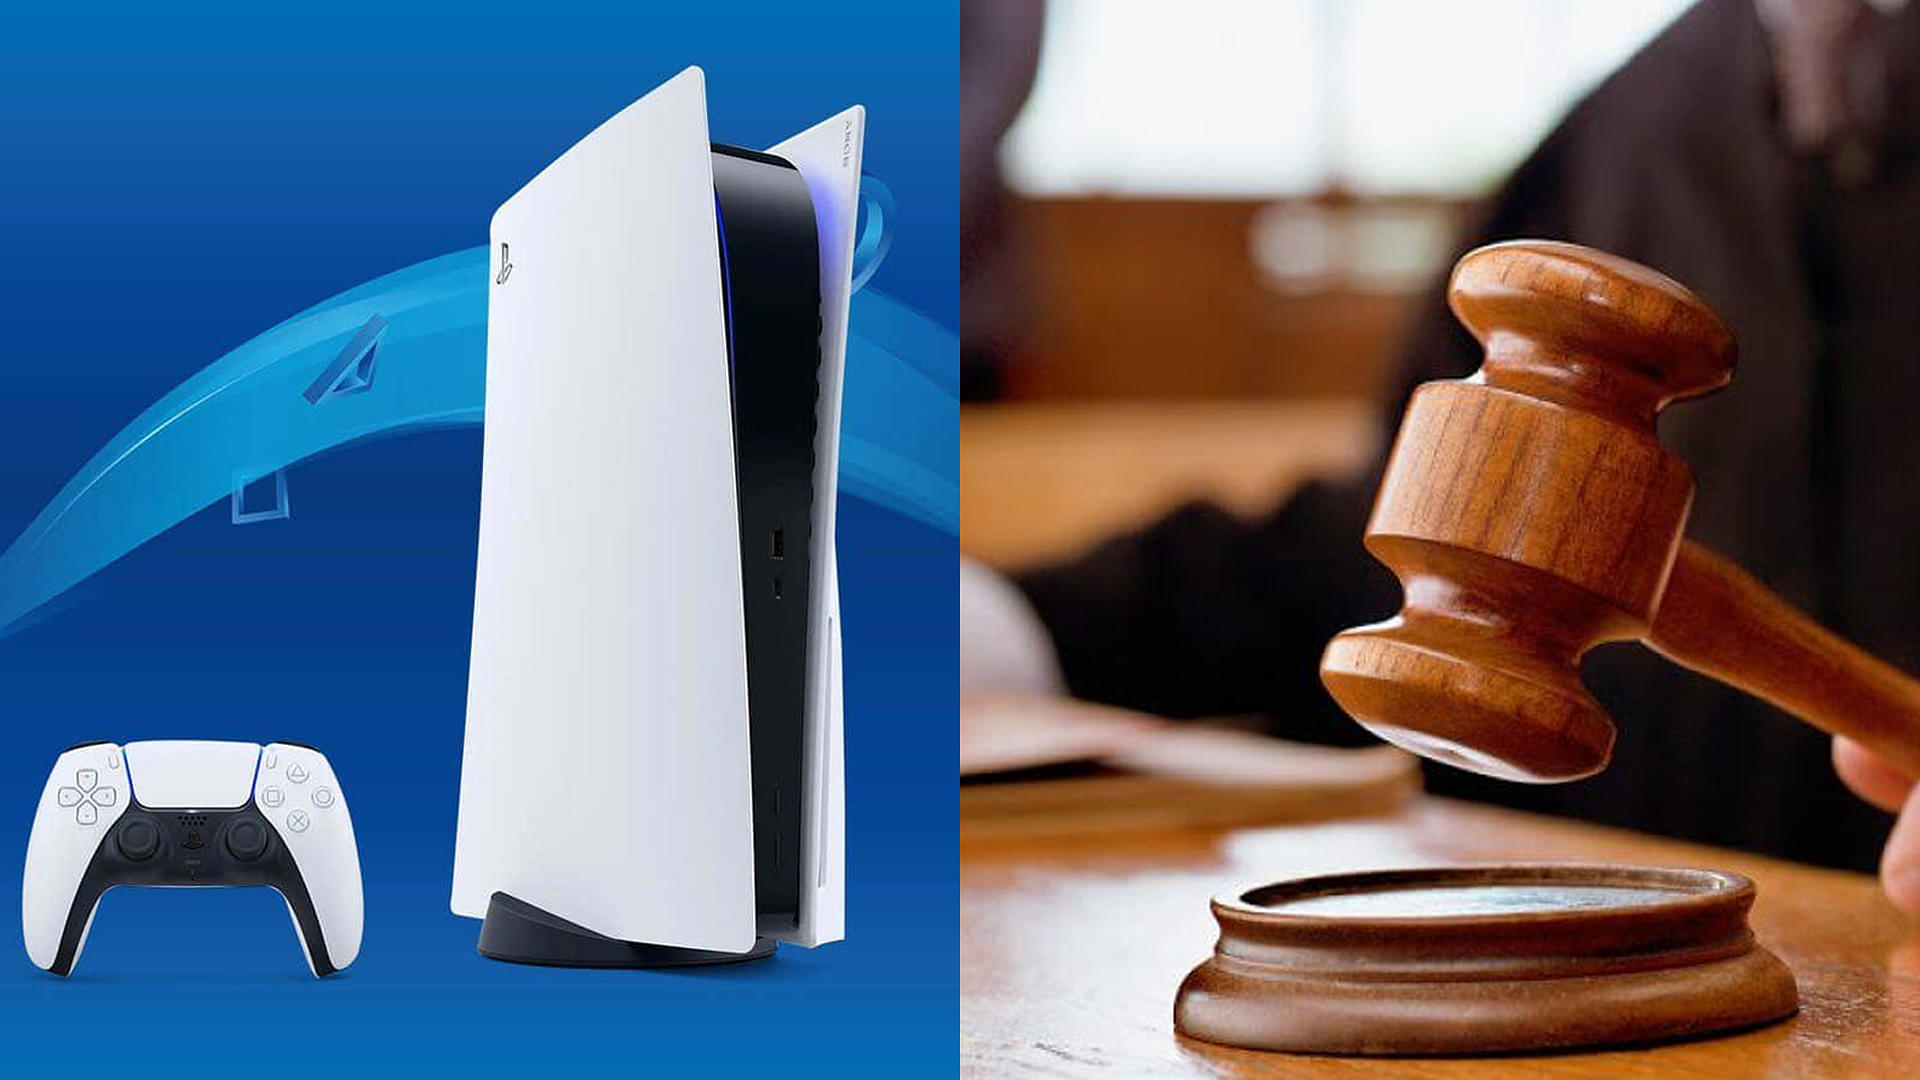 An image showing Sony PlayStation 5 and court hammer